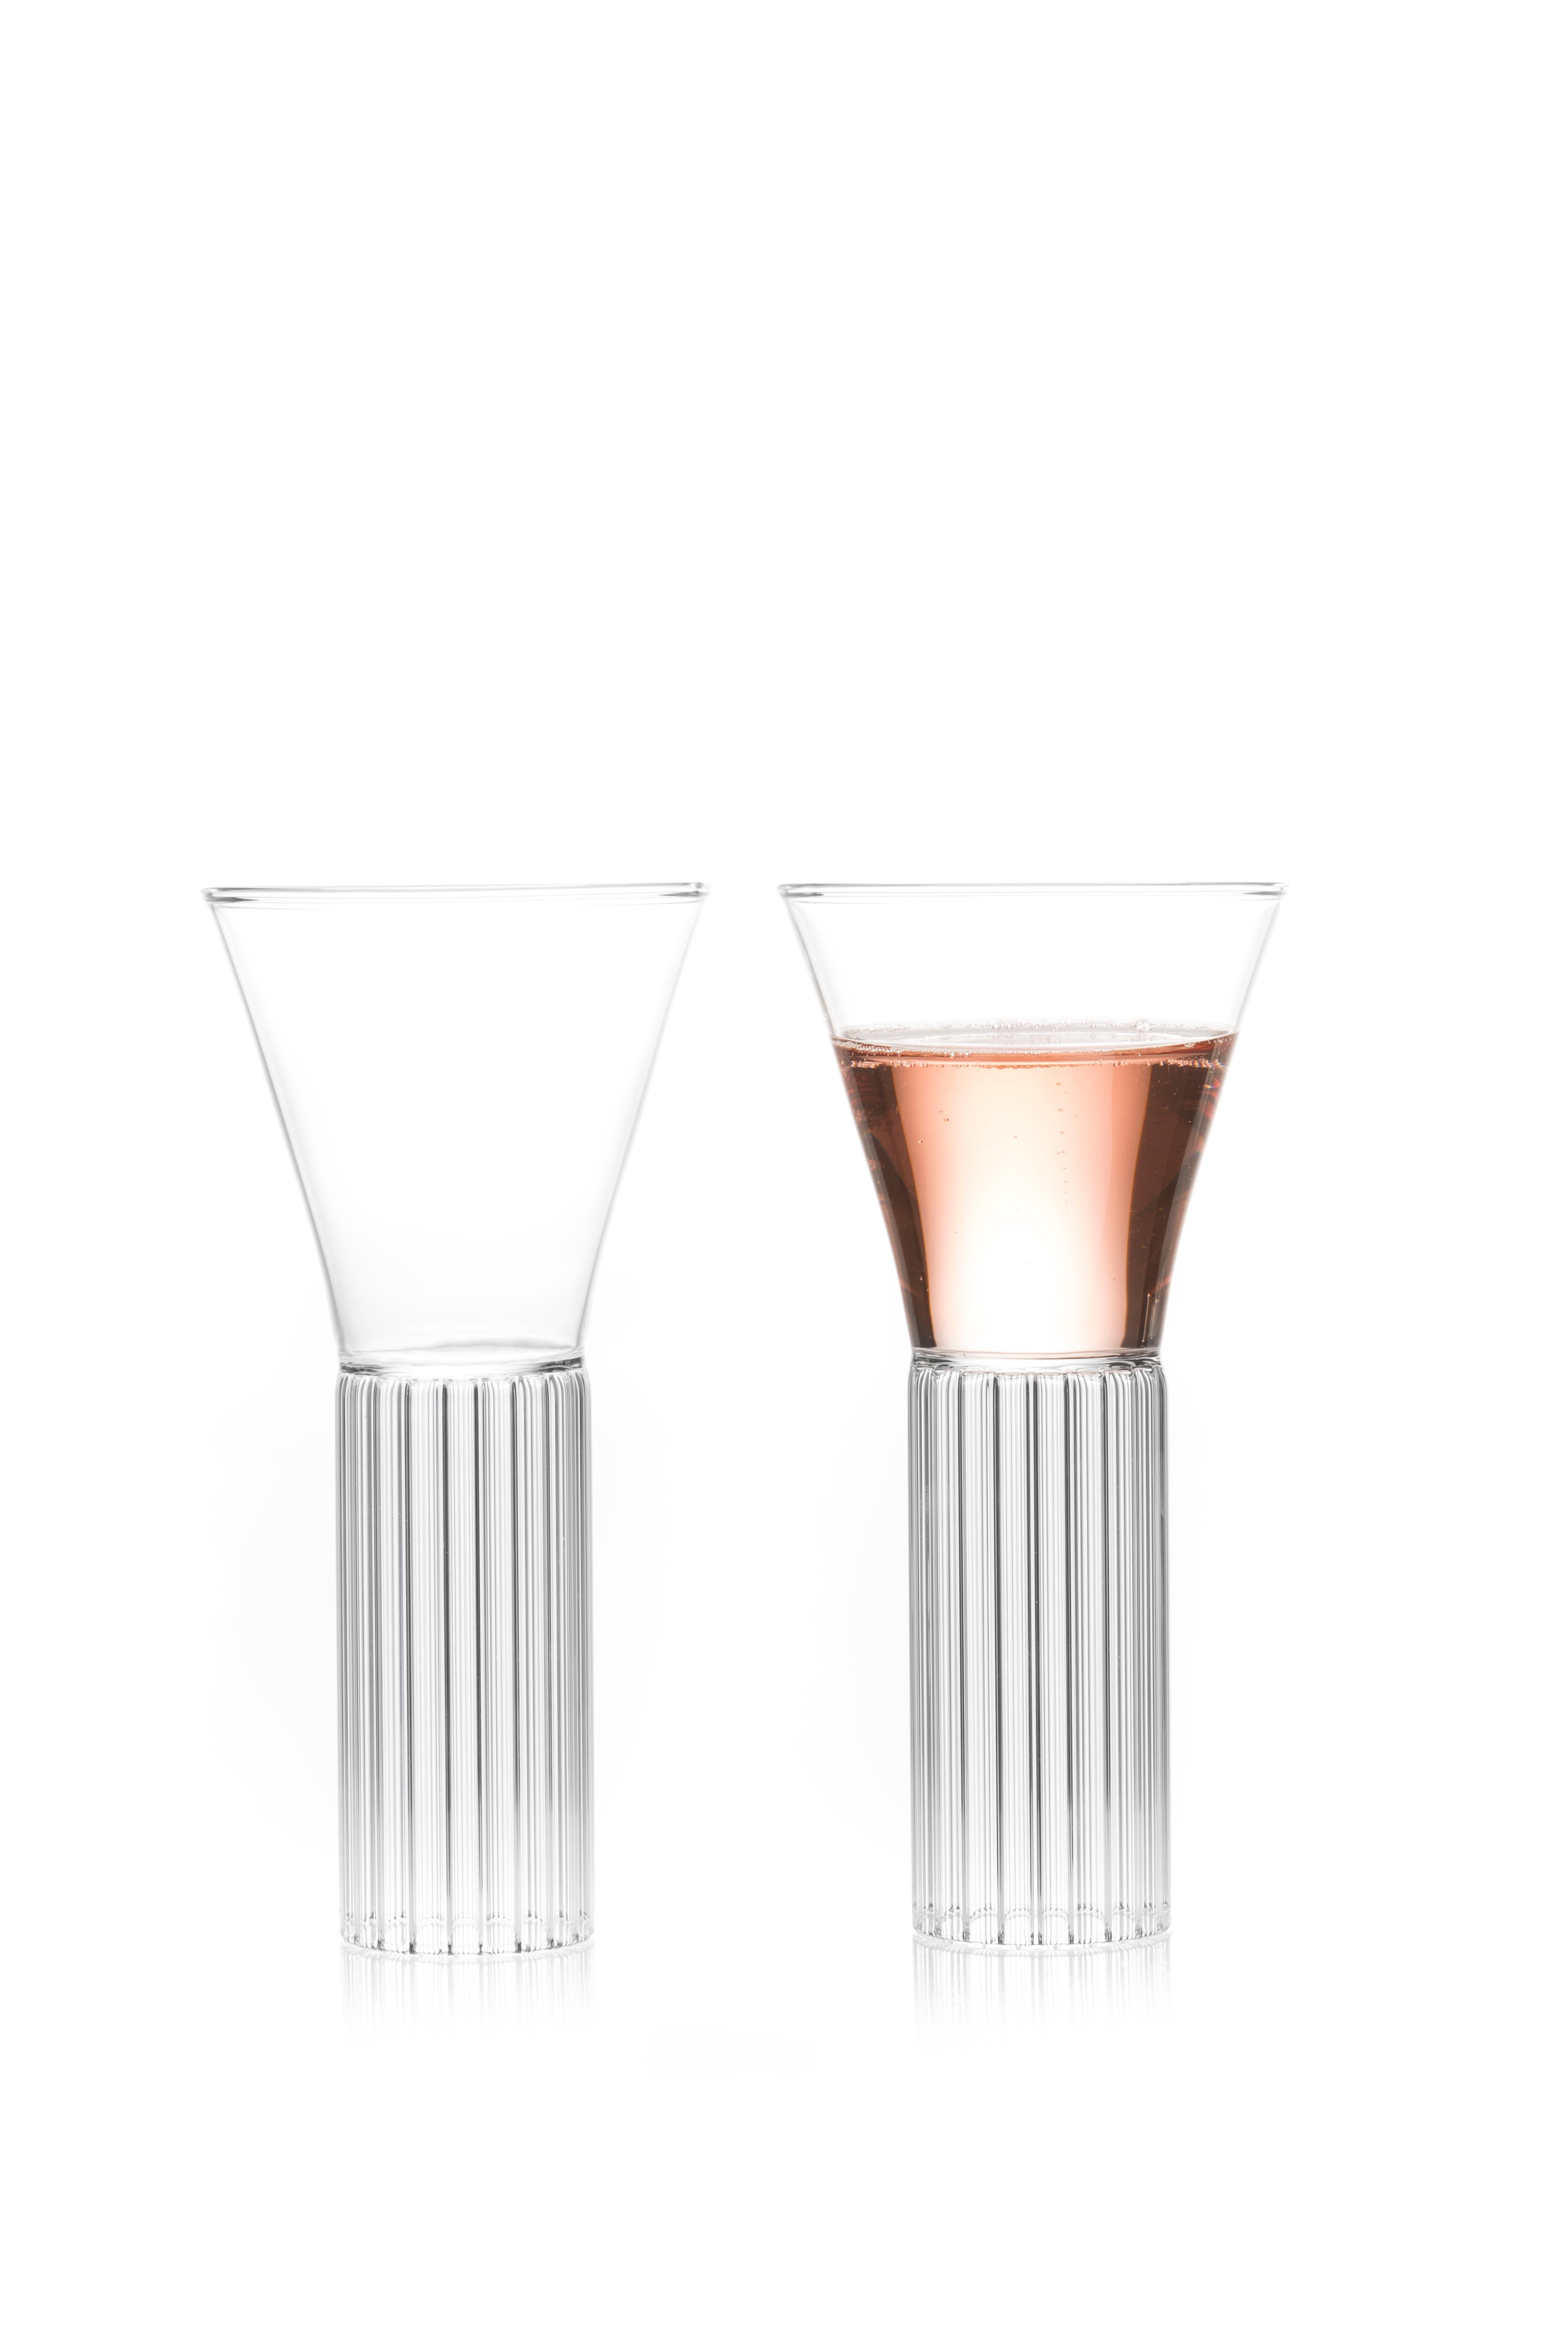 Sofia medium cocktail wine glasses, set of two.

With the elegance of a forgotten time, the clear Czech contemporary Sofia collection glasses are a series of barware ideal for beverages from wine and water to martinis and other libations.